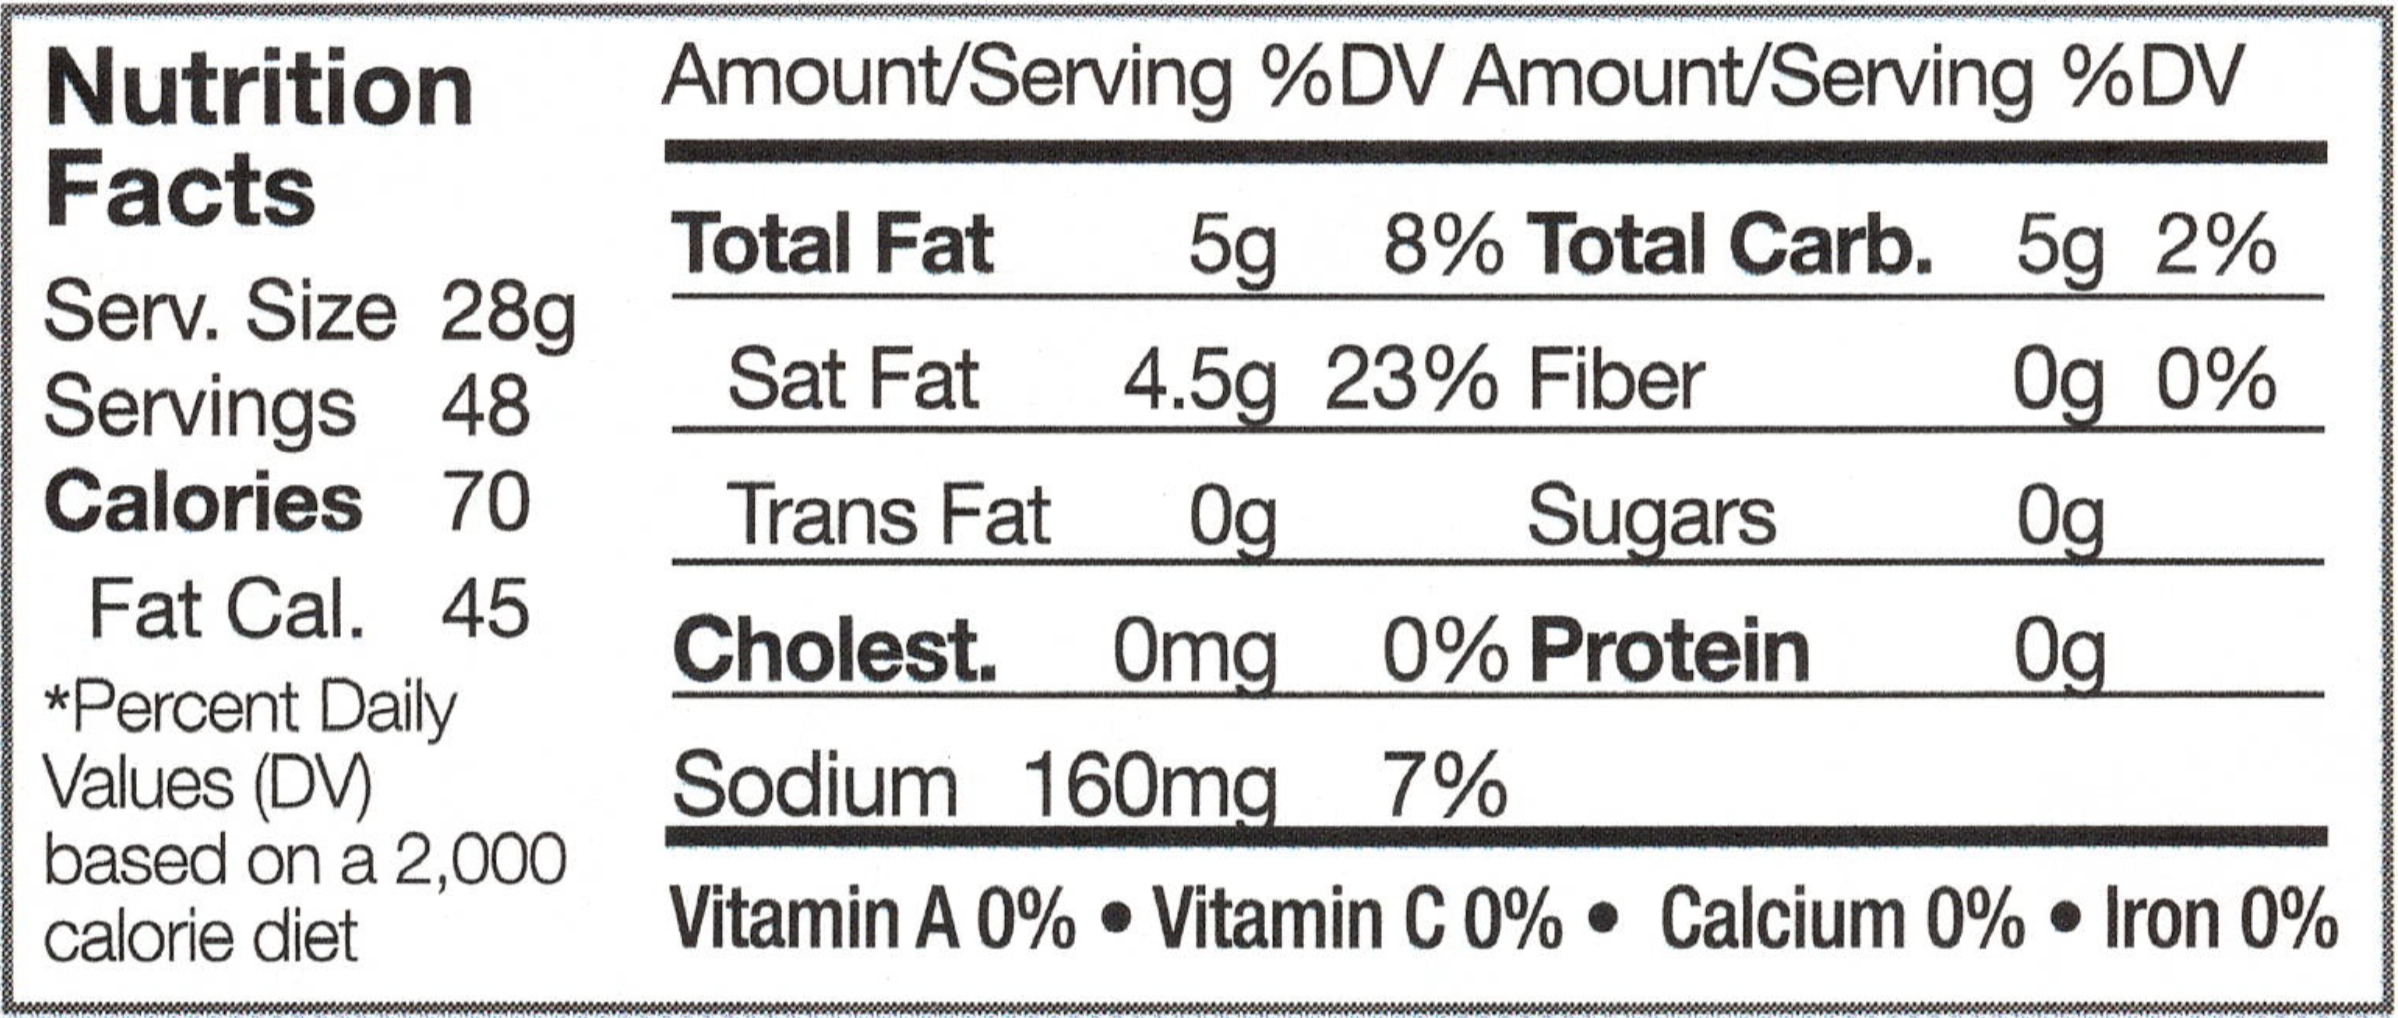 Serving Size: 28g, Servings: 48, Calories: 70, Fat Calories: 45, *Percent Daily Value (DV) based on a 2,000 calorie diet, Anmount/Serving, % DV, Total Fat: 5g, 8%, Saturated Fat: 4.5g, 23%, Trans Fat: 0g, Cholesterol: 0mg 0%, Sodium: 160mg, 7%, Total Carbohydrates: 5g, 2%, Fiber: 0g, 0%, Sugars: 0g, Protein, 0g, Vitamin A: 0%, Vitamin C: 0%, Calcium: 0%, Iron: 0%